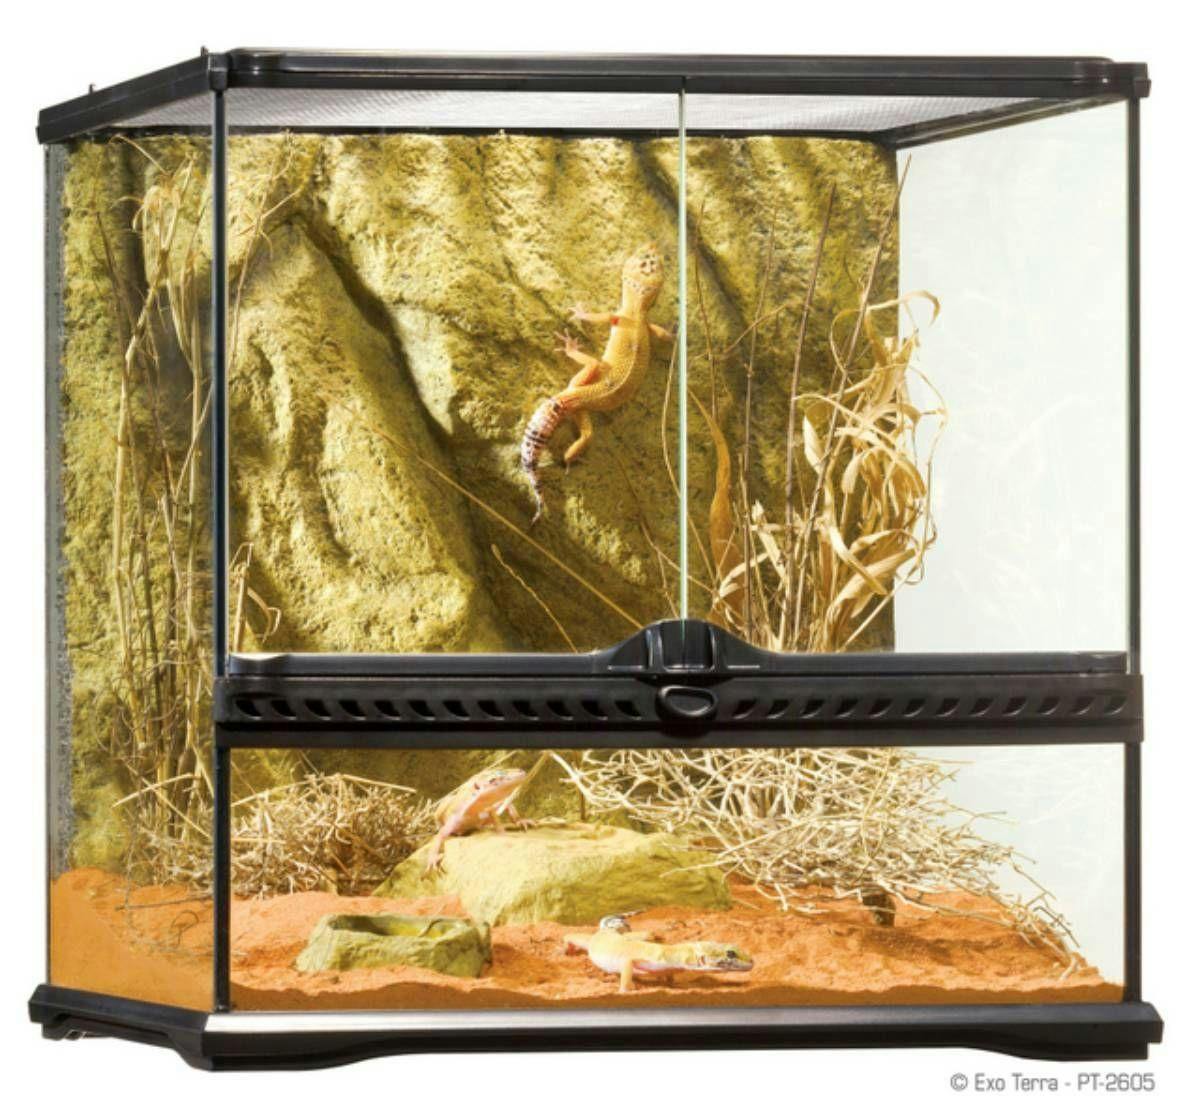 Image for Exo Terra Glass Terrarium 18”x18”x18” by Josh's Frogs